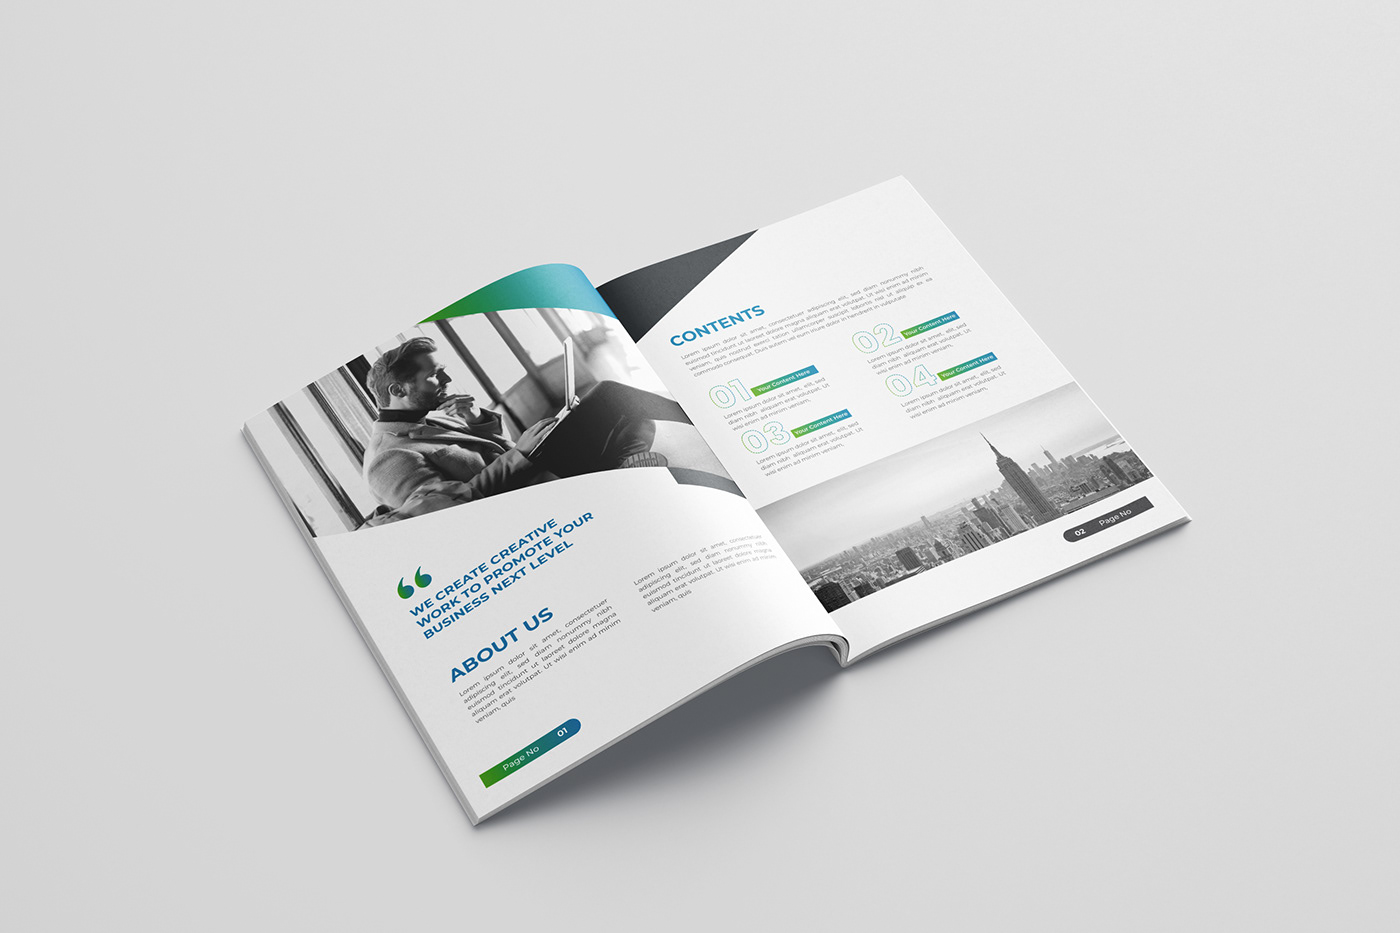 brochure design,
company profile,
Layout design,
annual report,
Template,
Proposal,
Booklet,
indesig